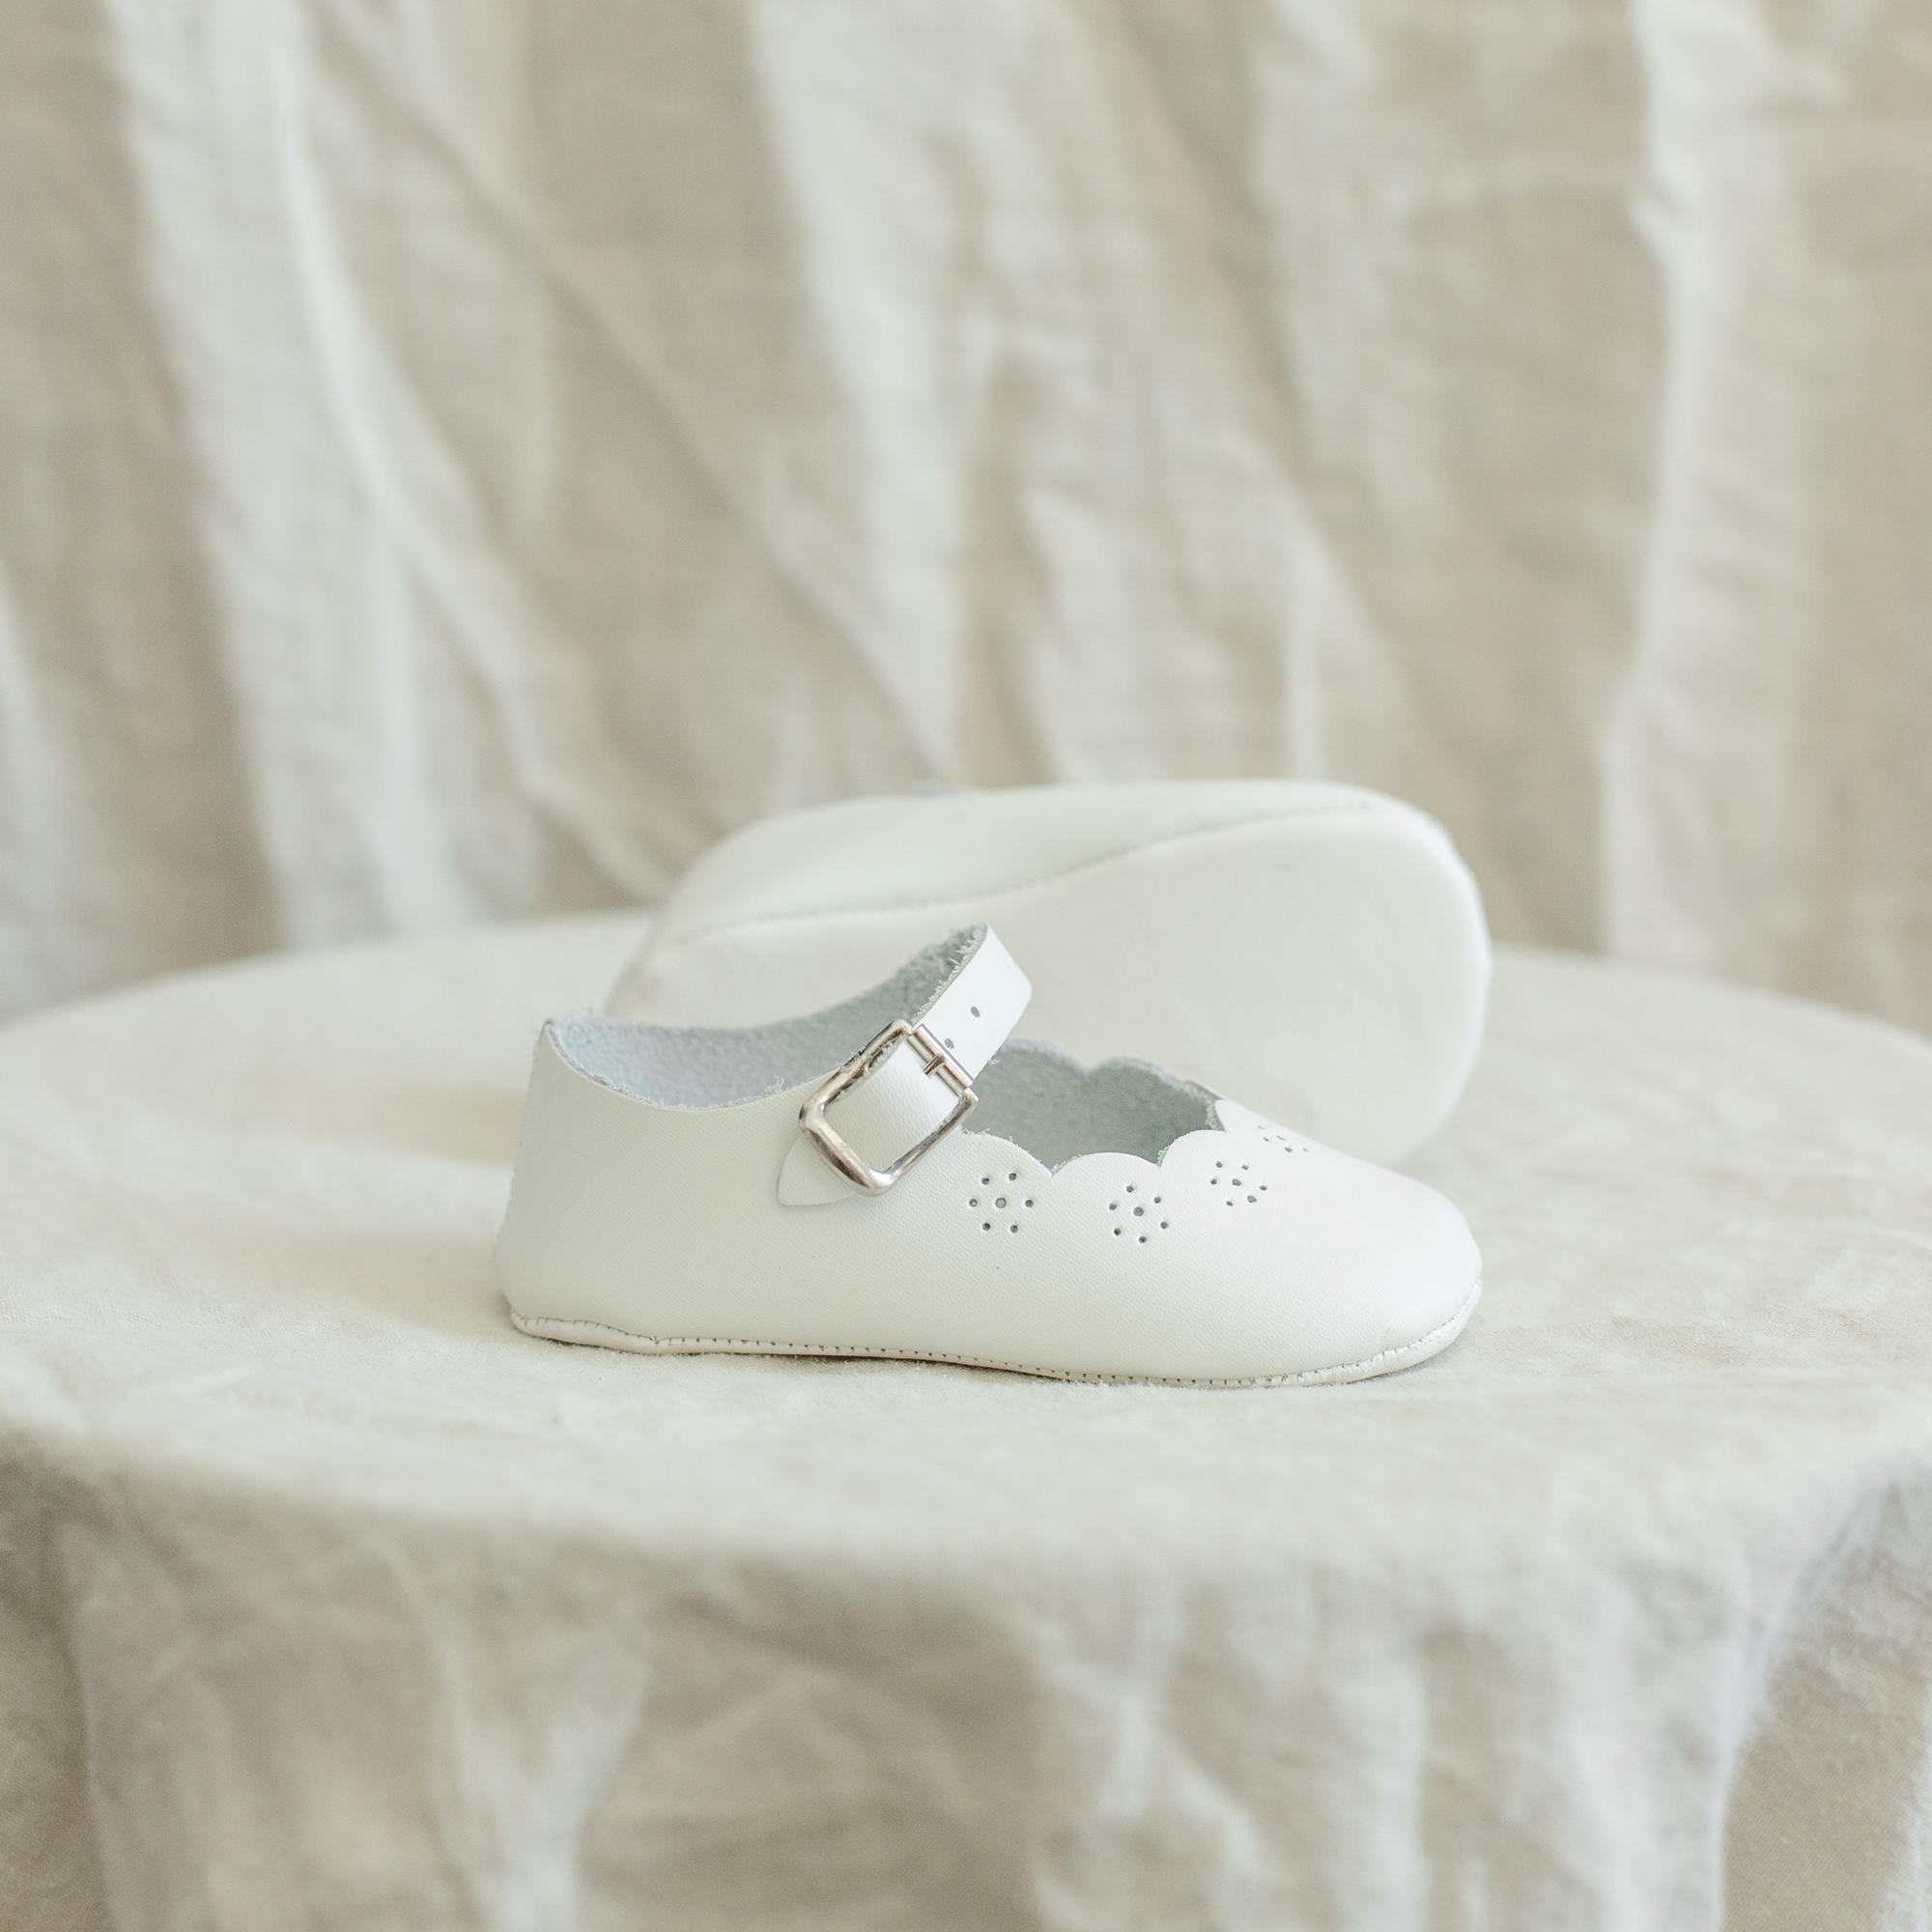 zimmerman-shoes-soft-soled-scalloped-white-mary-jane-baby-footware.png